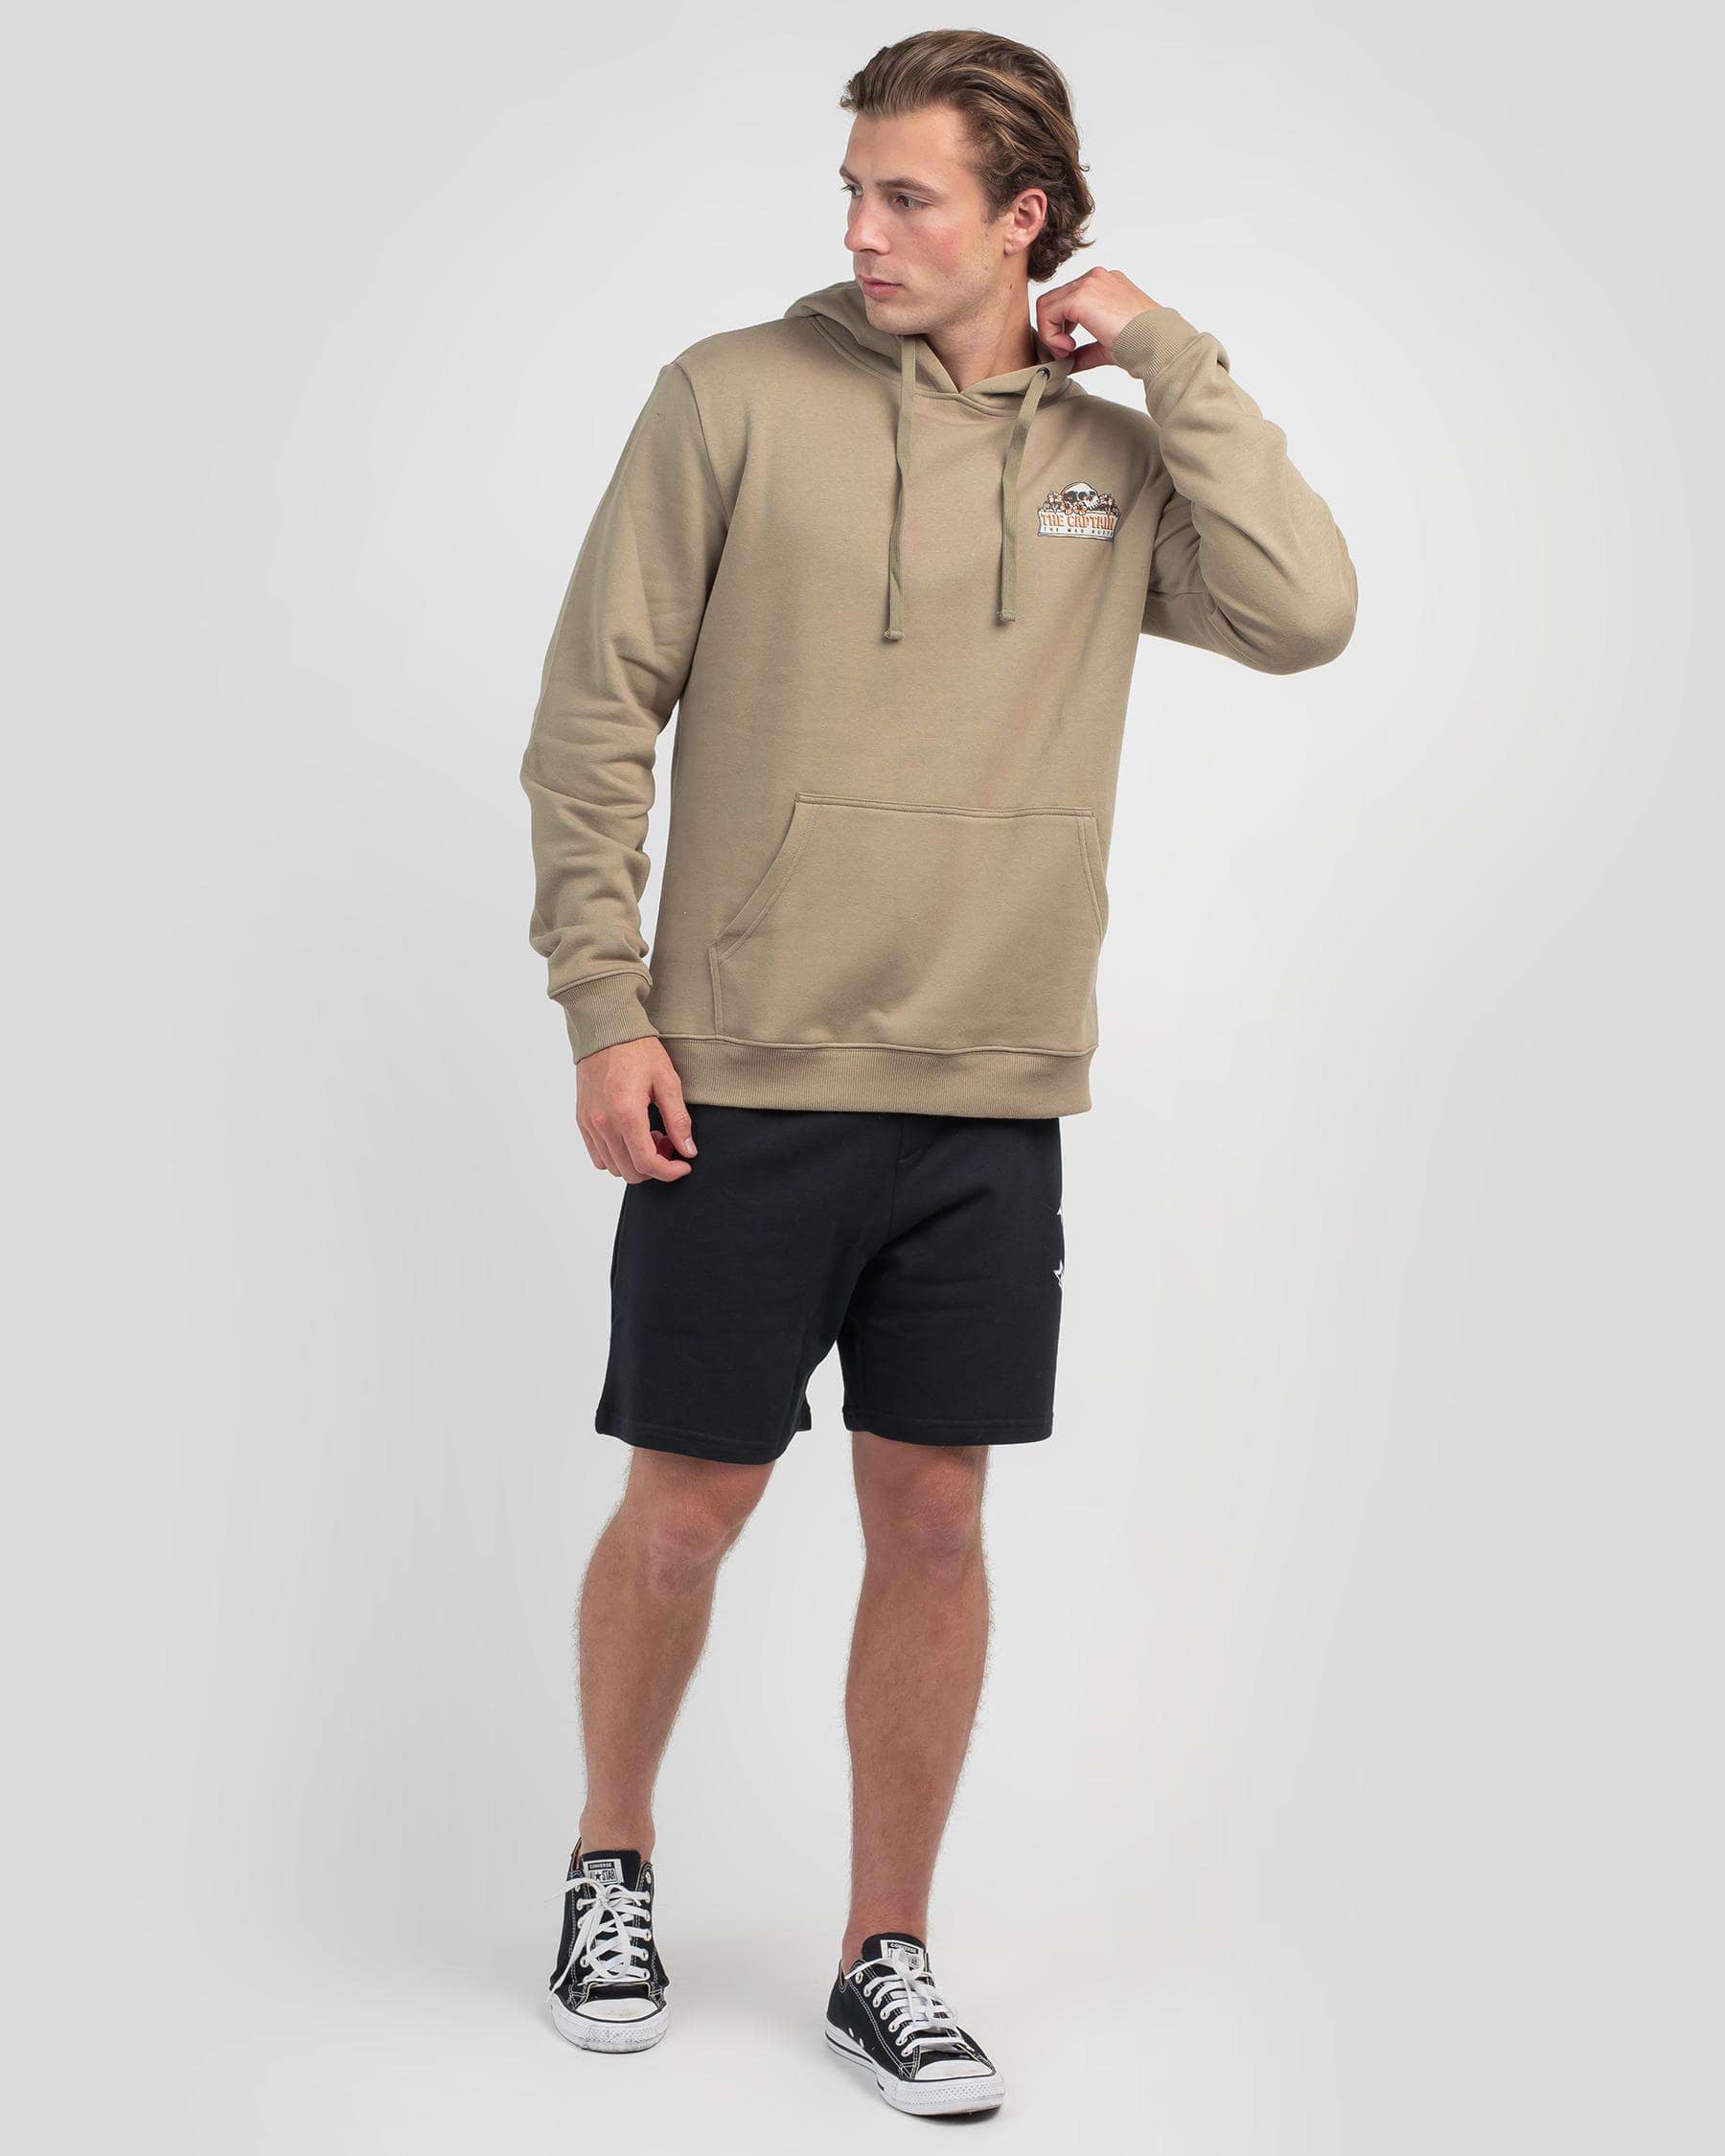 Shop The Mad Hueys Tropic Captain Hoodie In Khaki - Fast Shipping ...